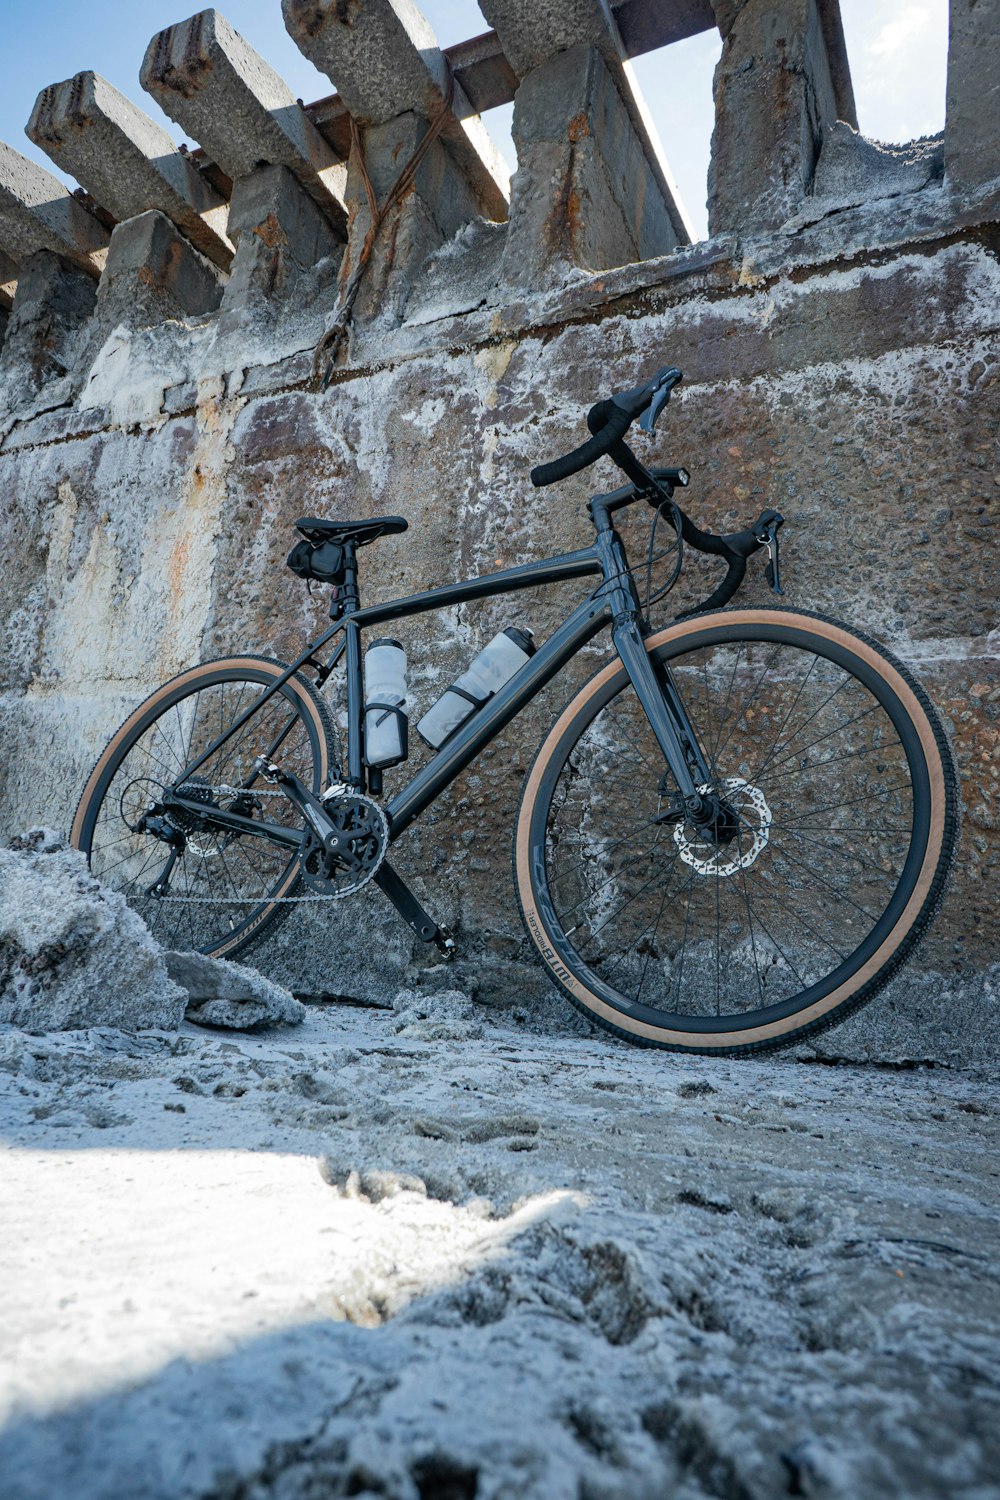 a bicycle parked on a rocky surface